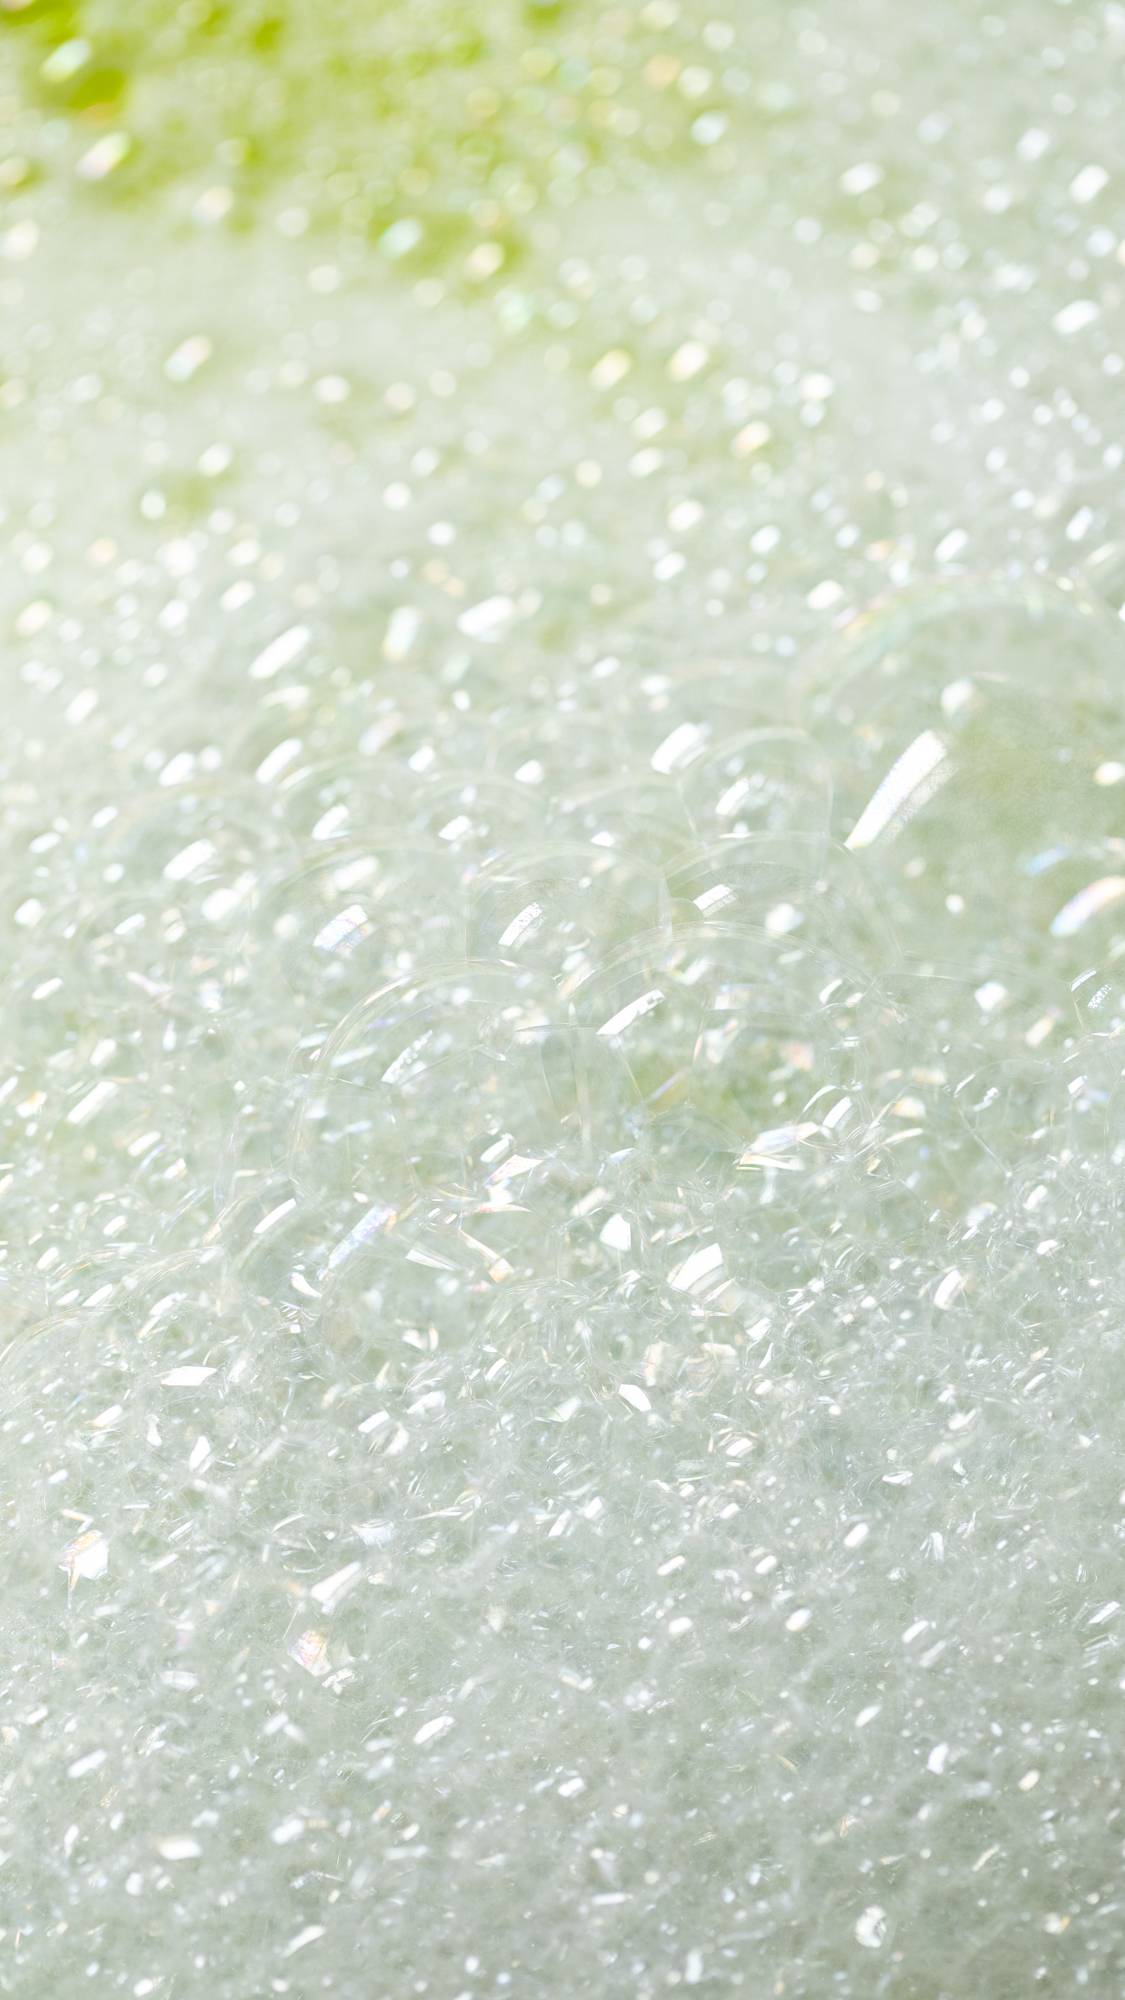 A super close-up of the thick blanket of hundreds and hundreds of bubbles.